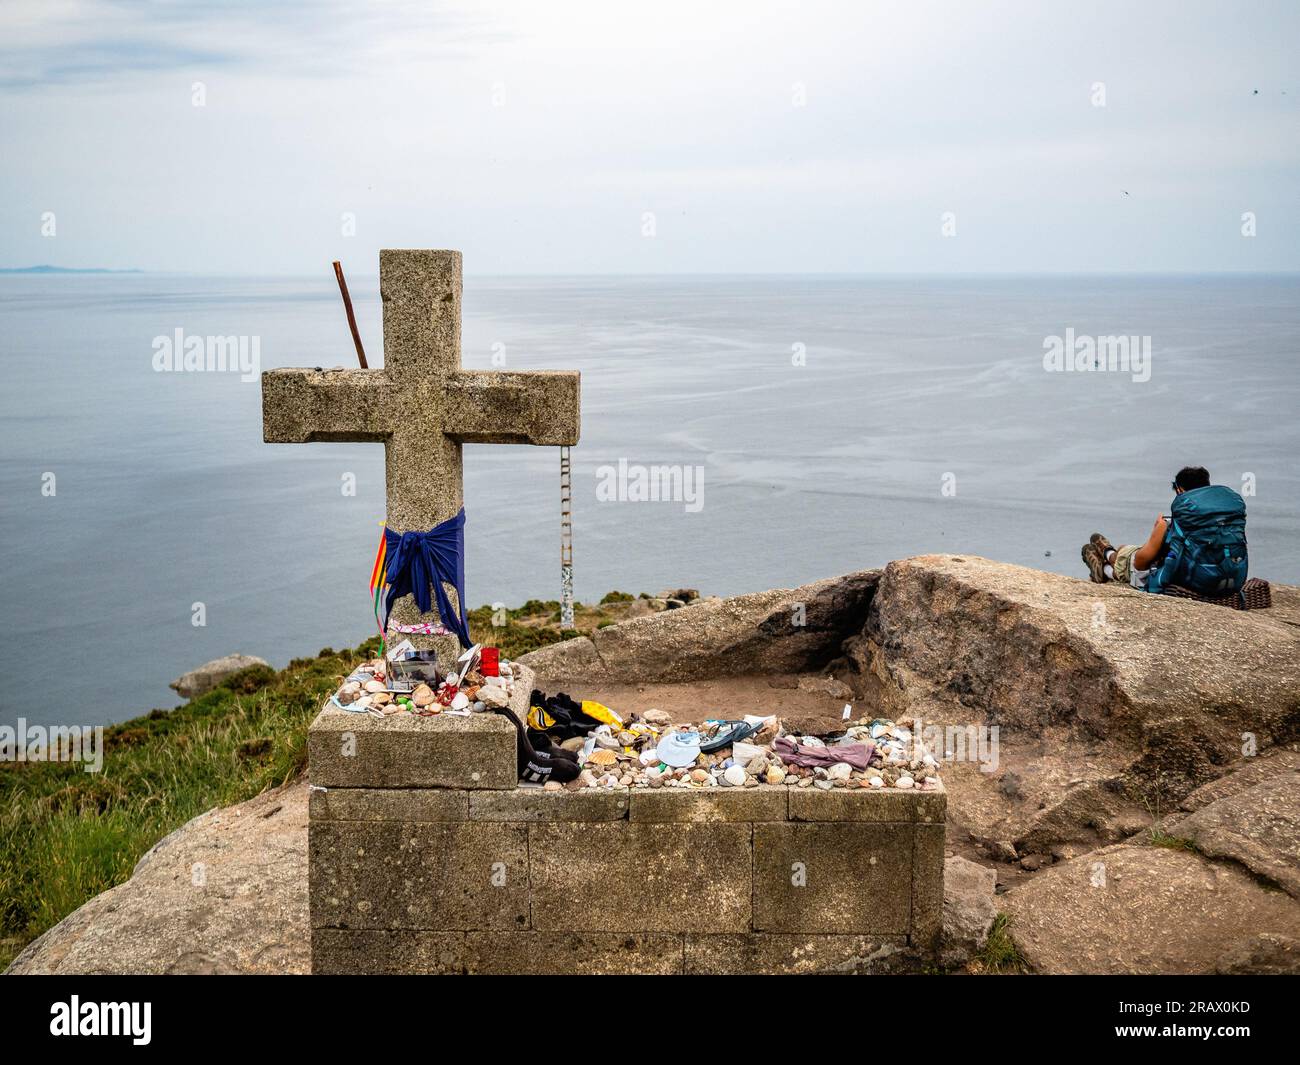 June 6, 2023, Finisterre, Spain: A pilgrim is seen taking a break next to one of the last stone crosses along the route. The Camino de Santiago (the Way of St. James) is a large network of ancient pilgrim routes stretching across Europe and coming together at the tomb of St. James (Santiago in Spanish) in Santiago de Compostela, Spain. Finisterre was both the end of the known world until Columbus altered things and the final destination of many of the pilgrims who made the journey to Santiago in past centuries. Pilgrims in past centuries also continued northwards up the coast to the Santuario Stock Photo